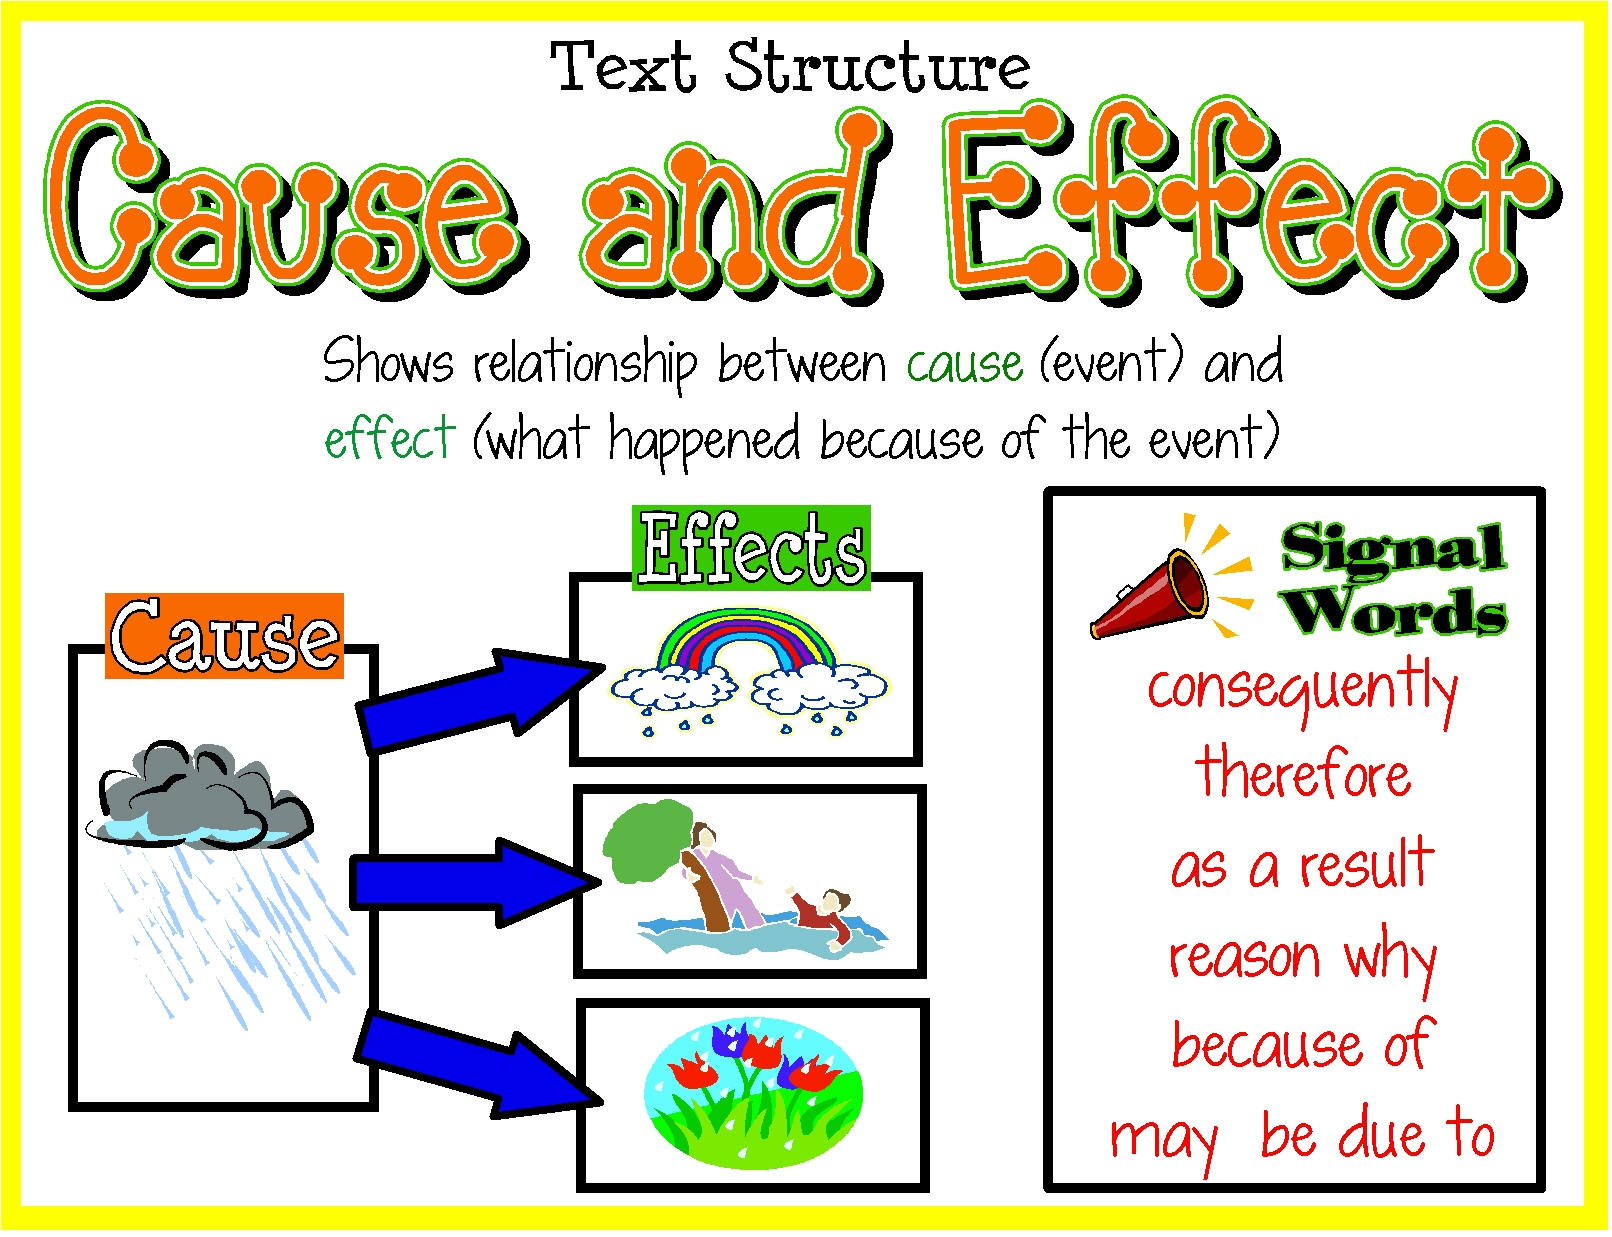 Cause and Effect. Cause and Effect в английском. Cause and Effect essay. Cause-and-Effect relationships.